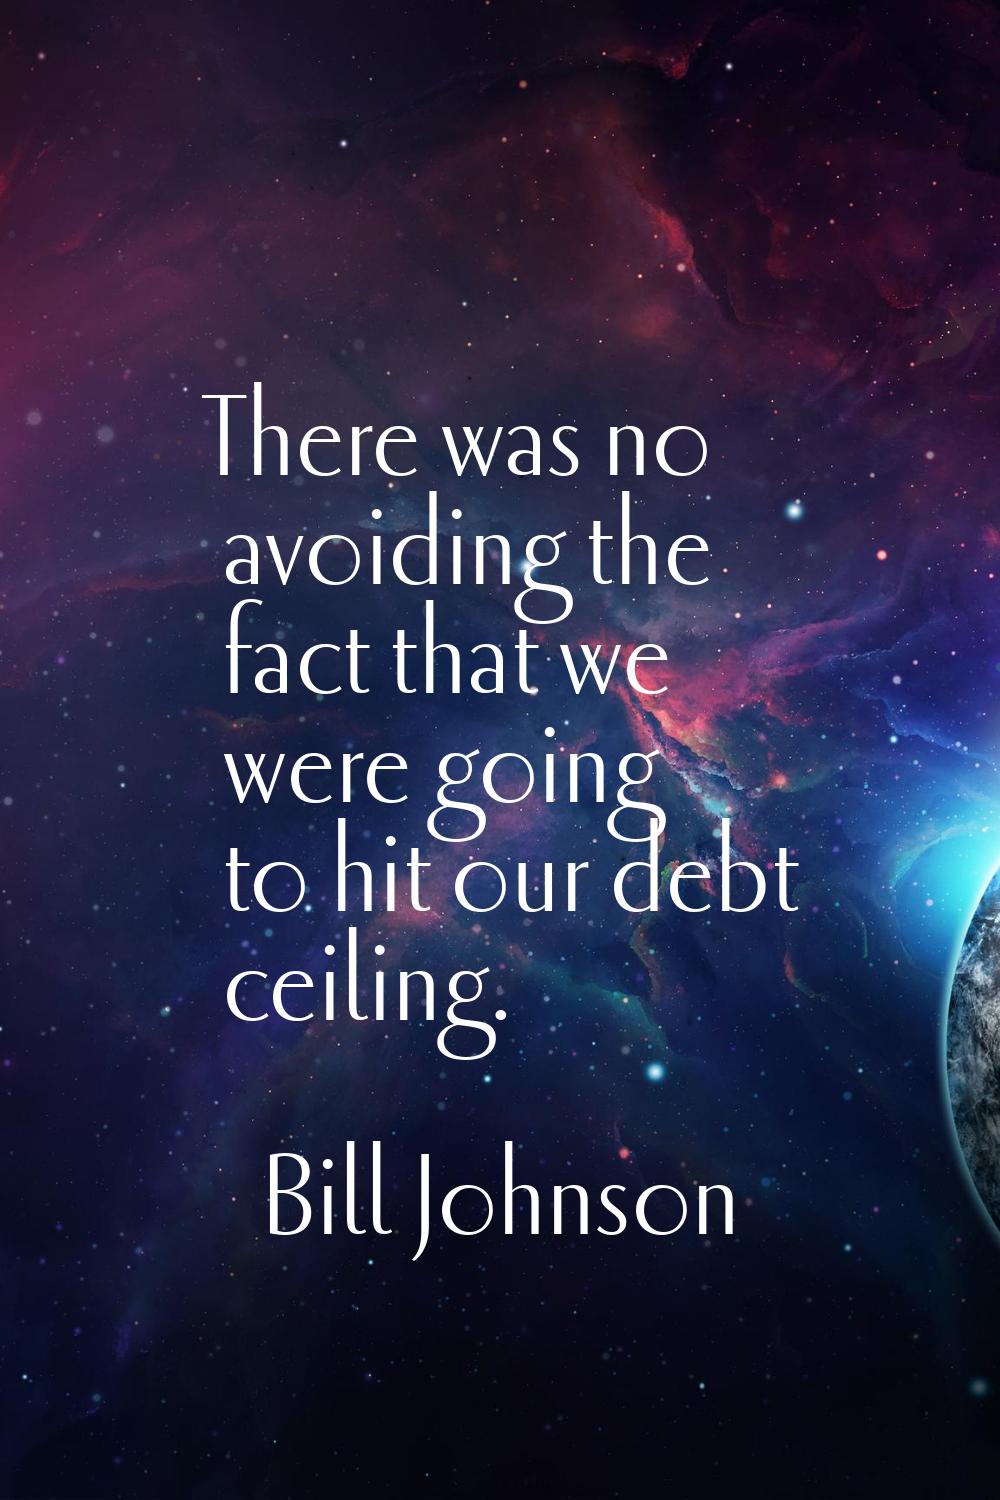 There was no avoiding the fact that we were going to hit our debt ceiling.